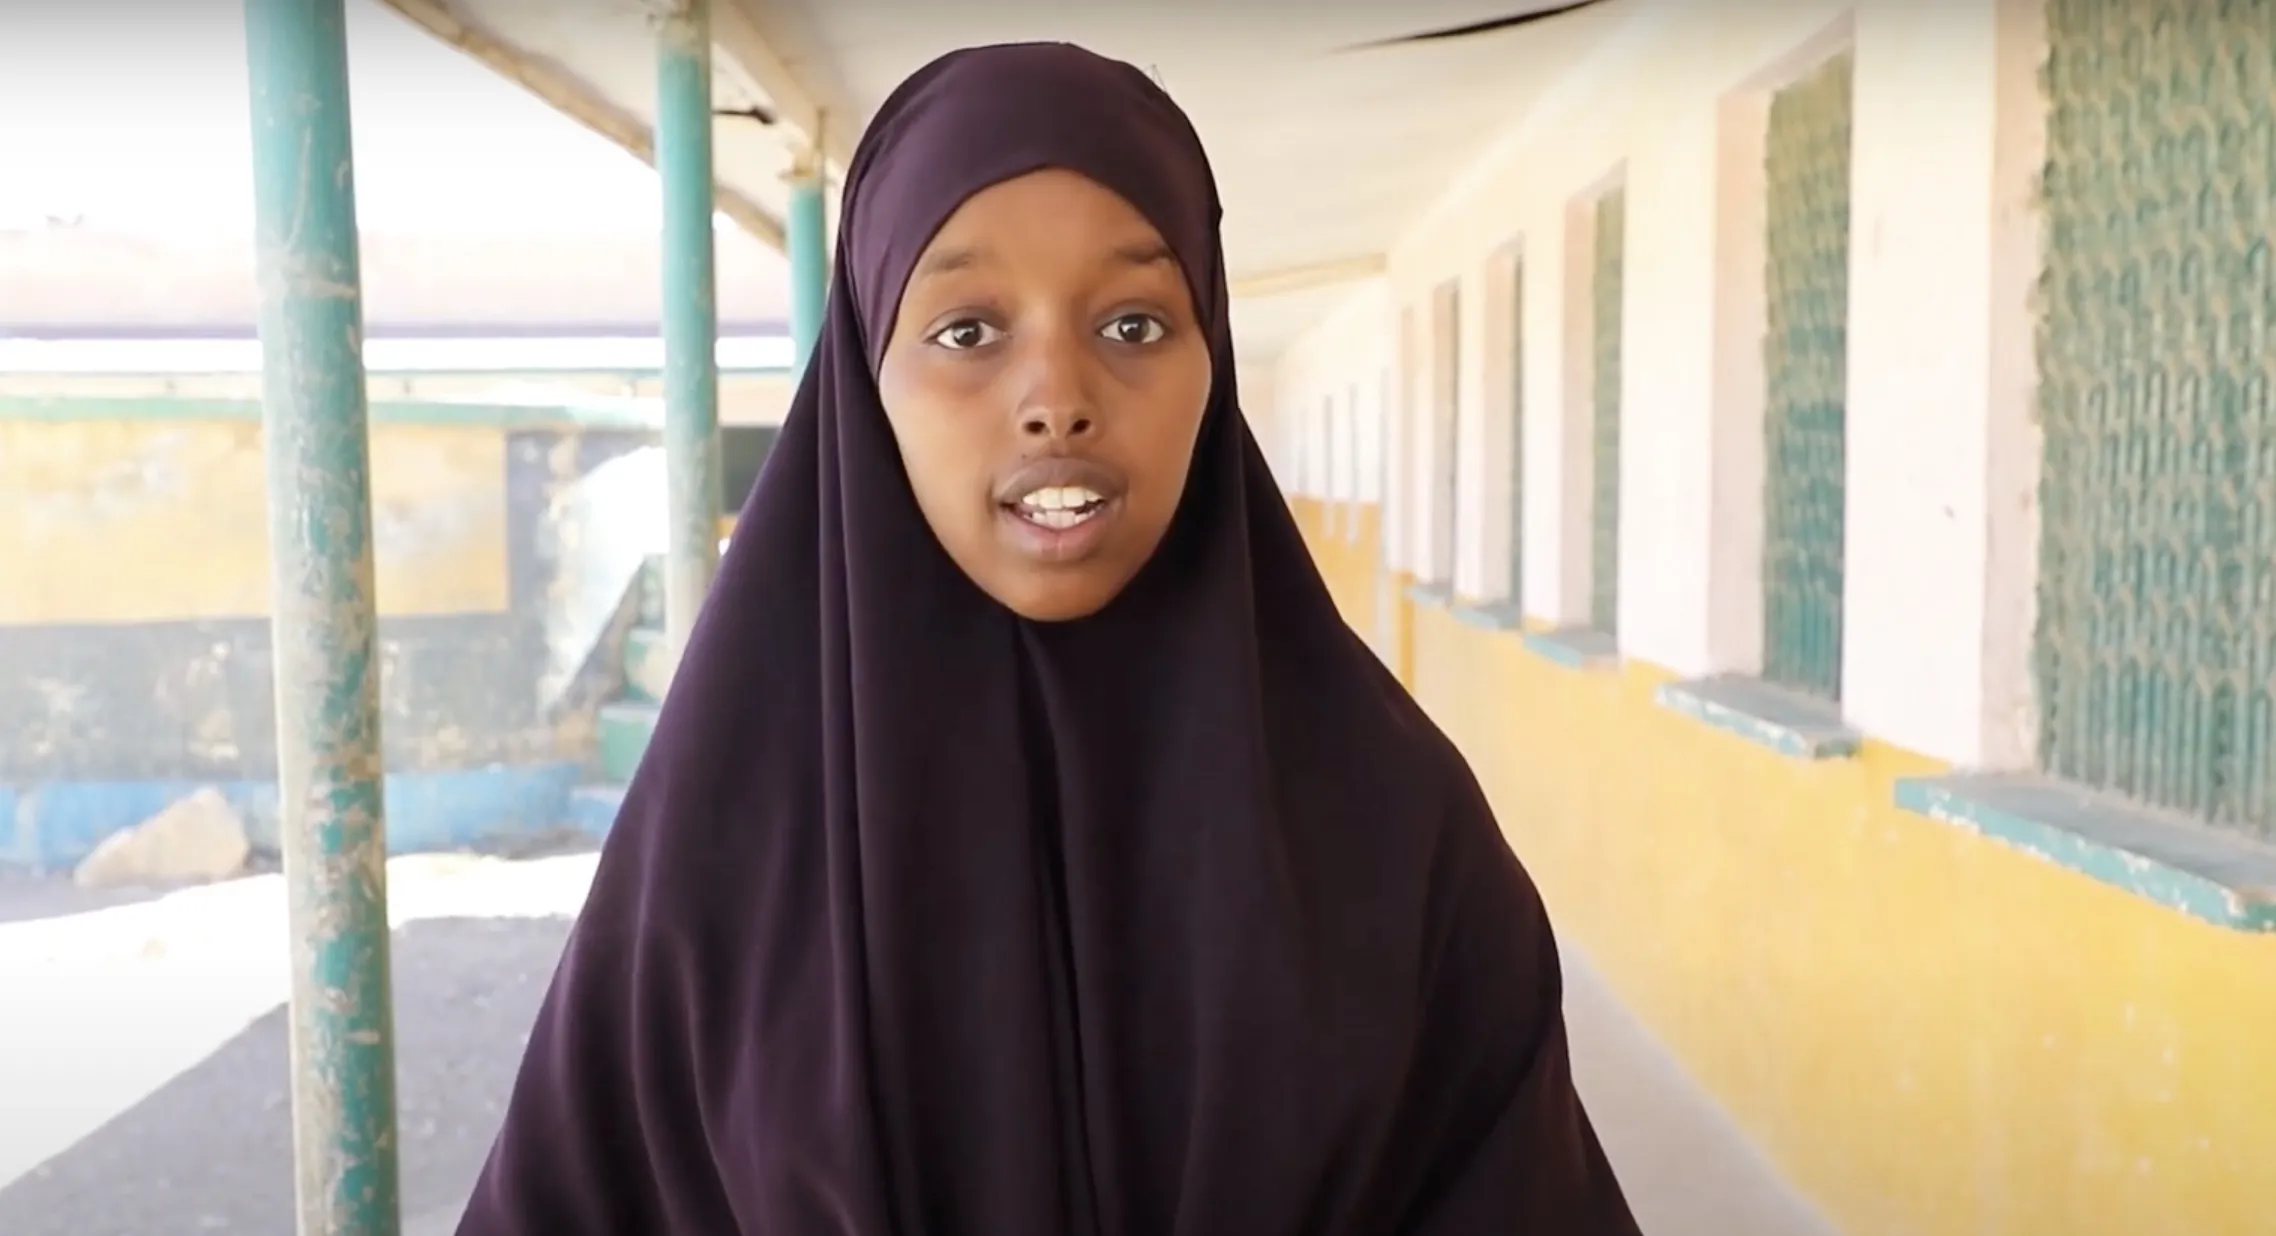 A girl in Somalia speaks to her peers about FGM